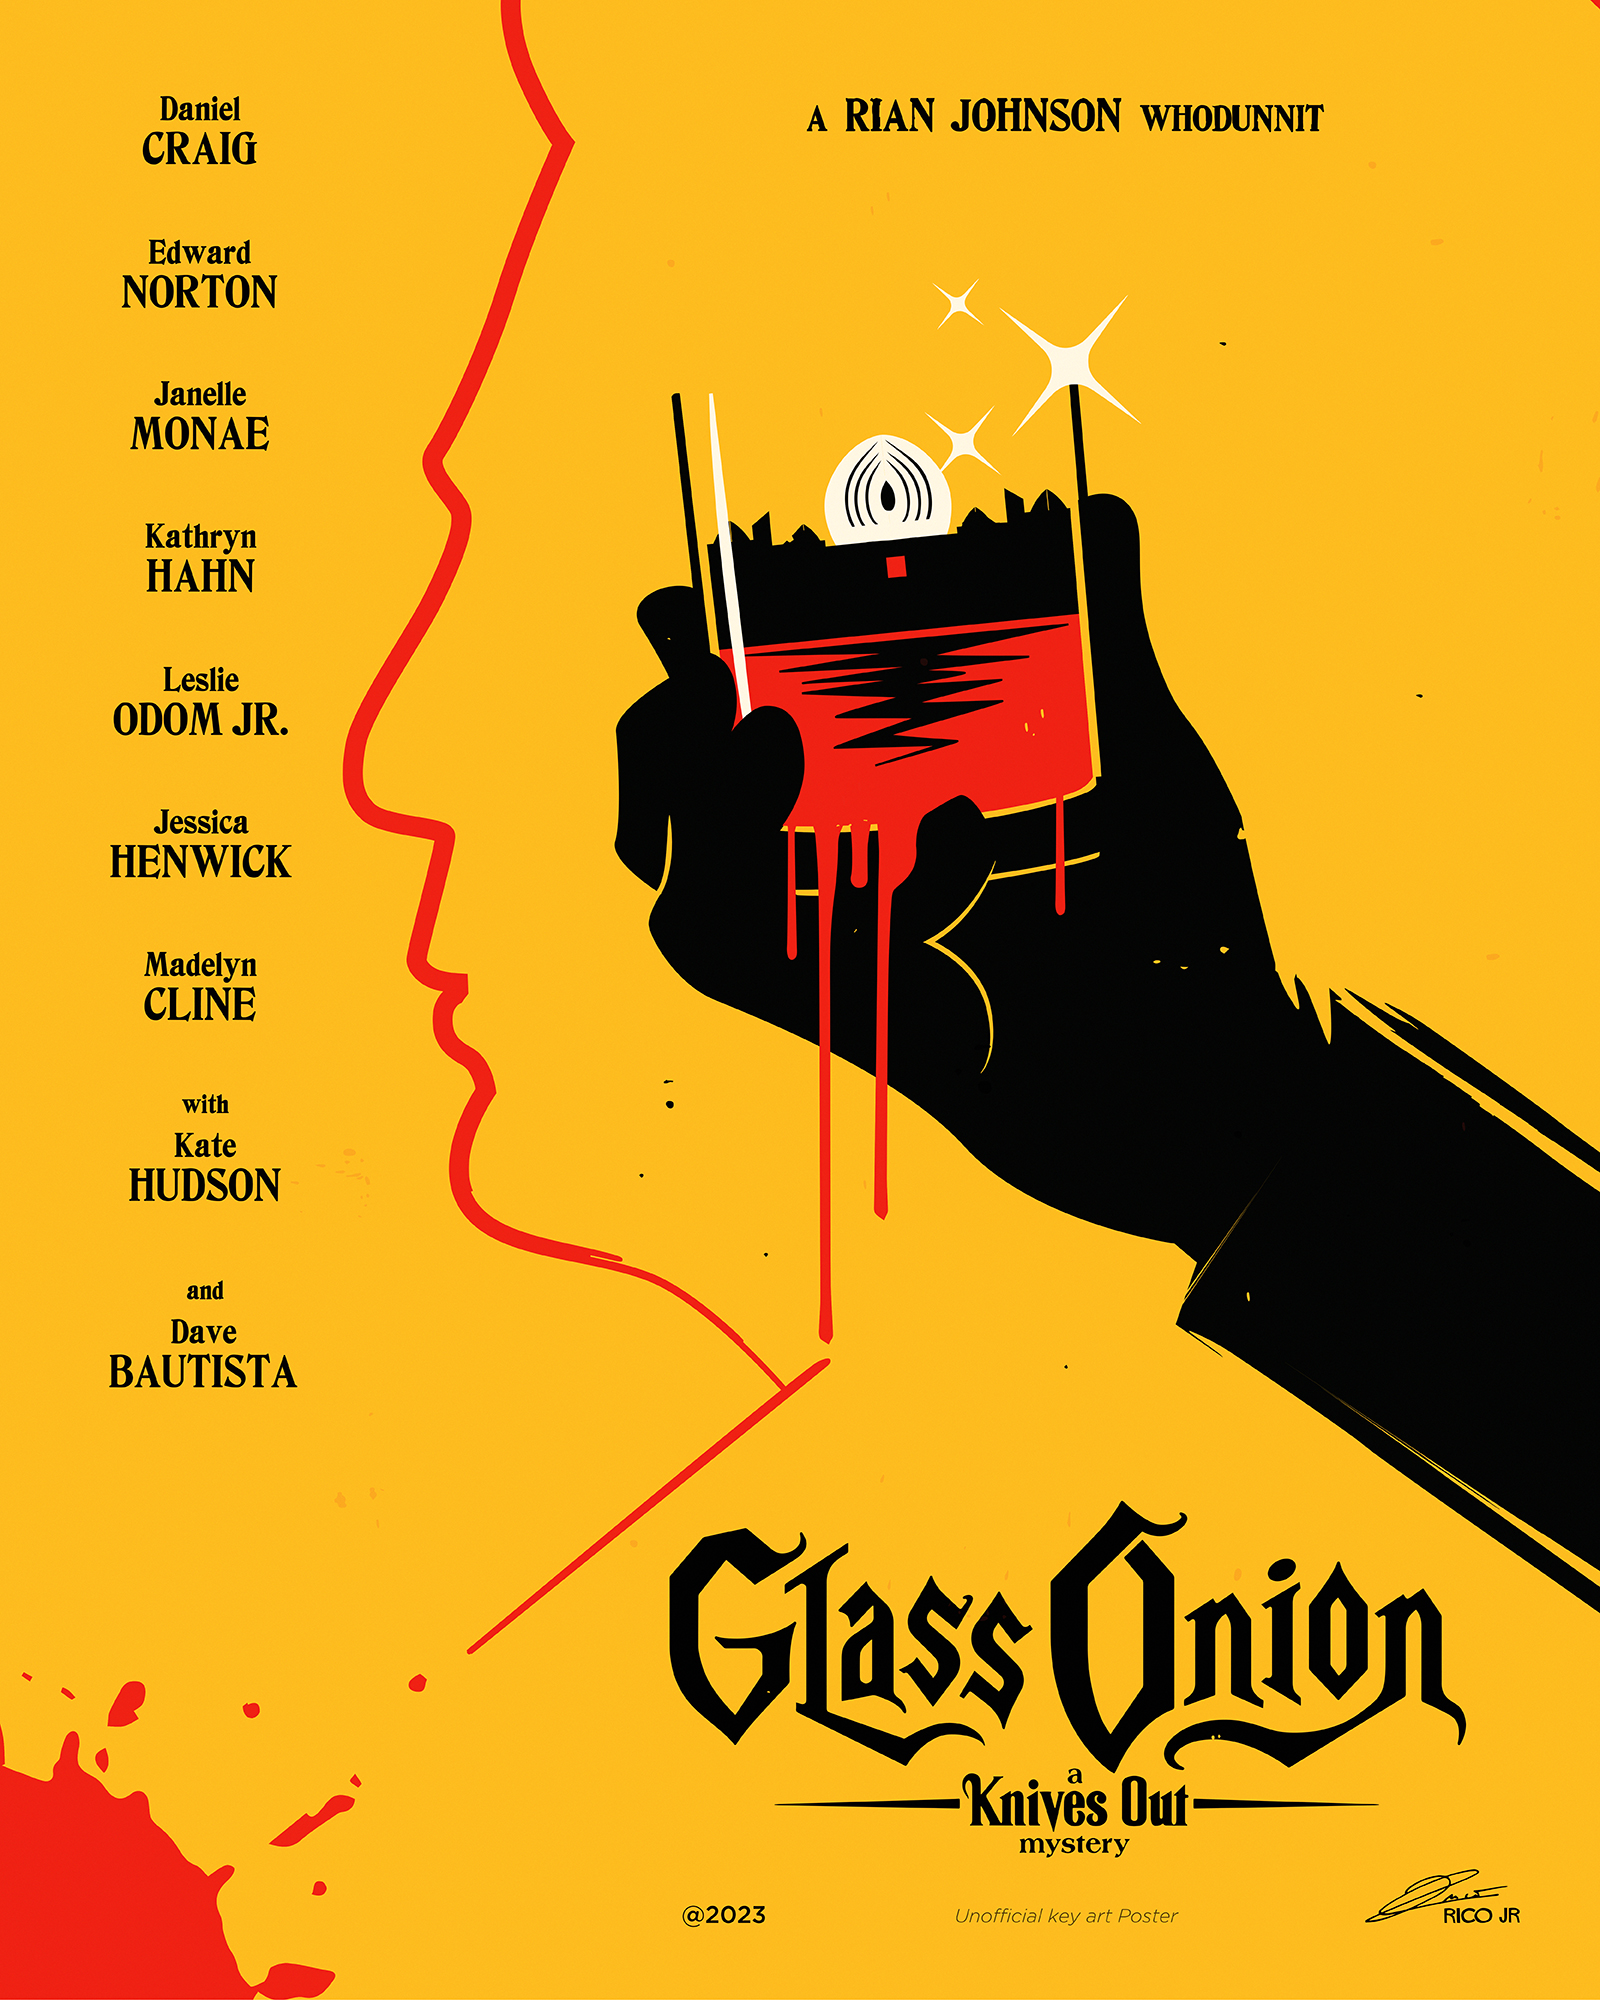 GLASS ONION (KNIVES OUT) Poster Art